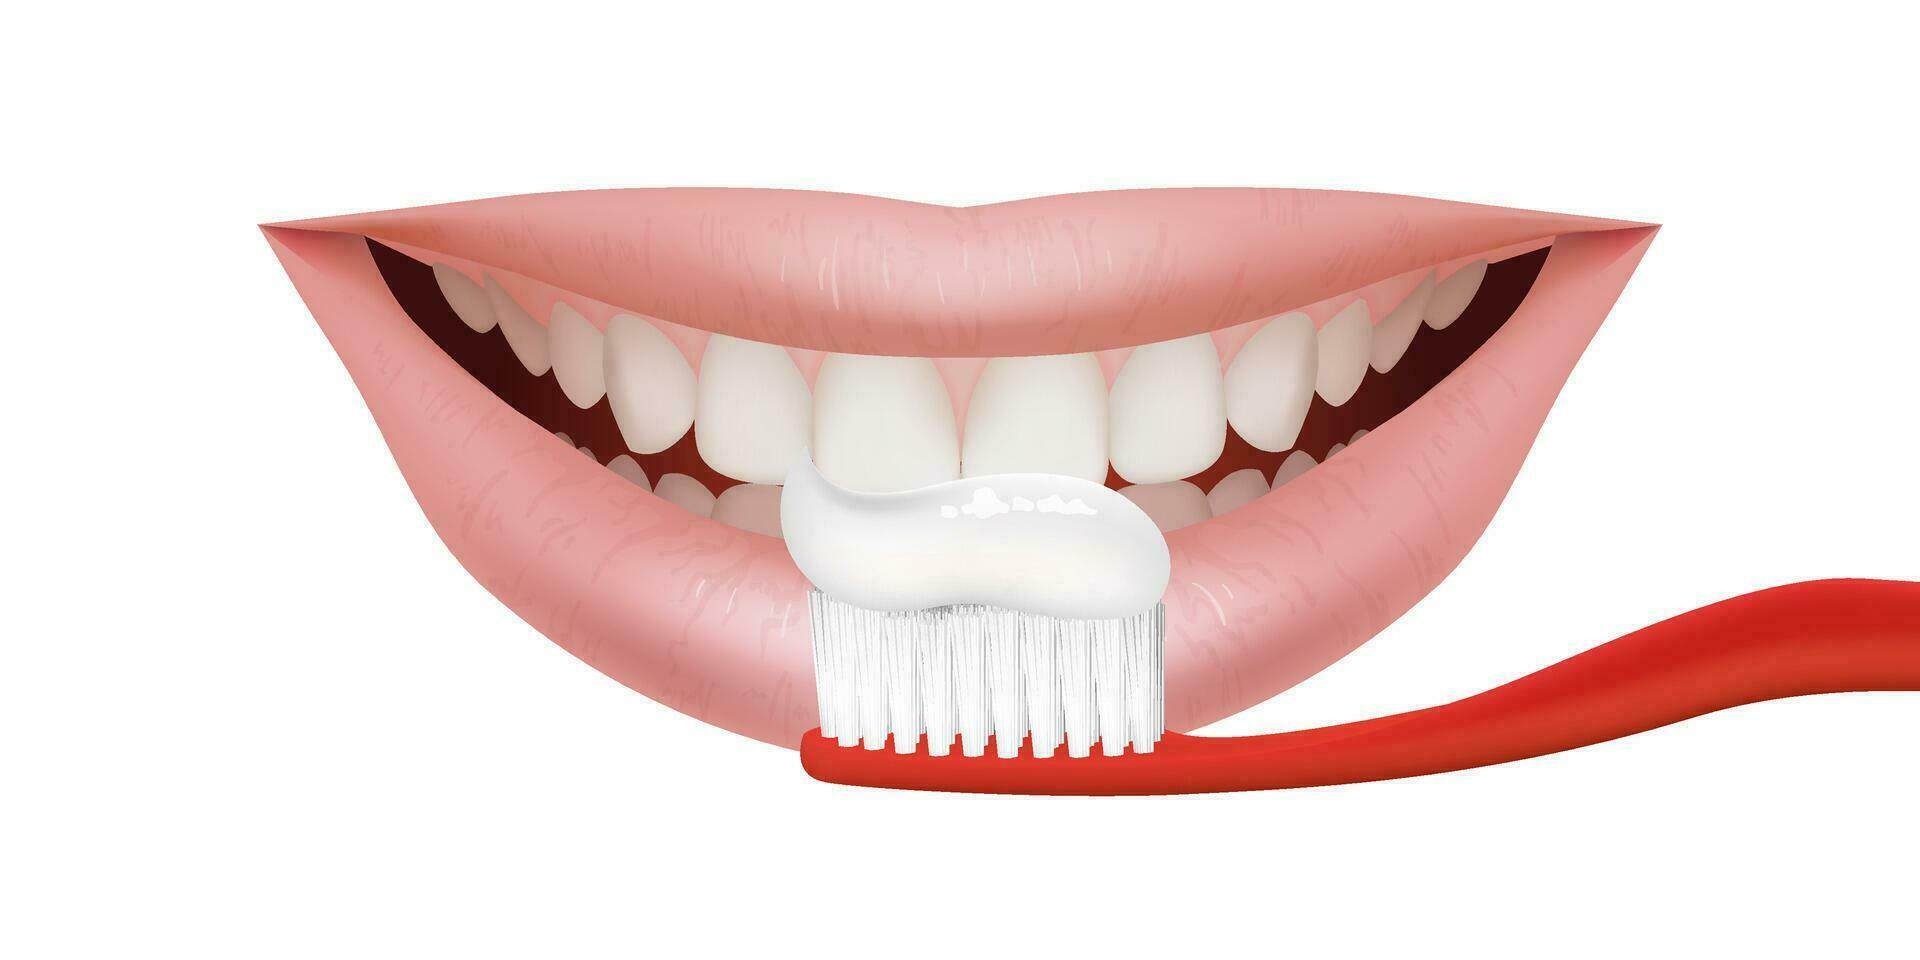 3D illustration of a realistic smile with healthy teeth. Realistic teeth being brushed using a red toothbrush. Oral health and hygiene For dental equipment or whitening treatment. Toothpaste promotion vector